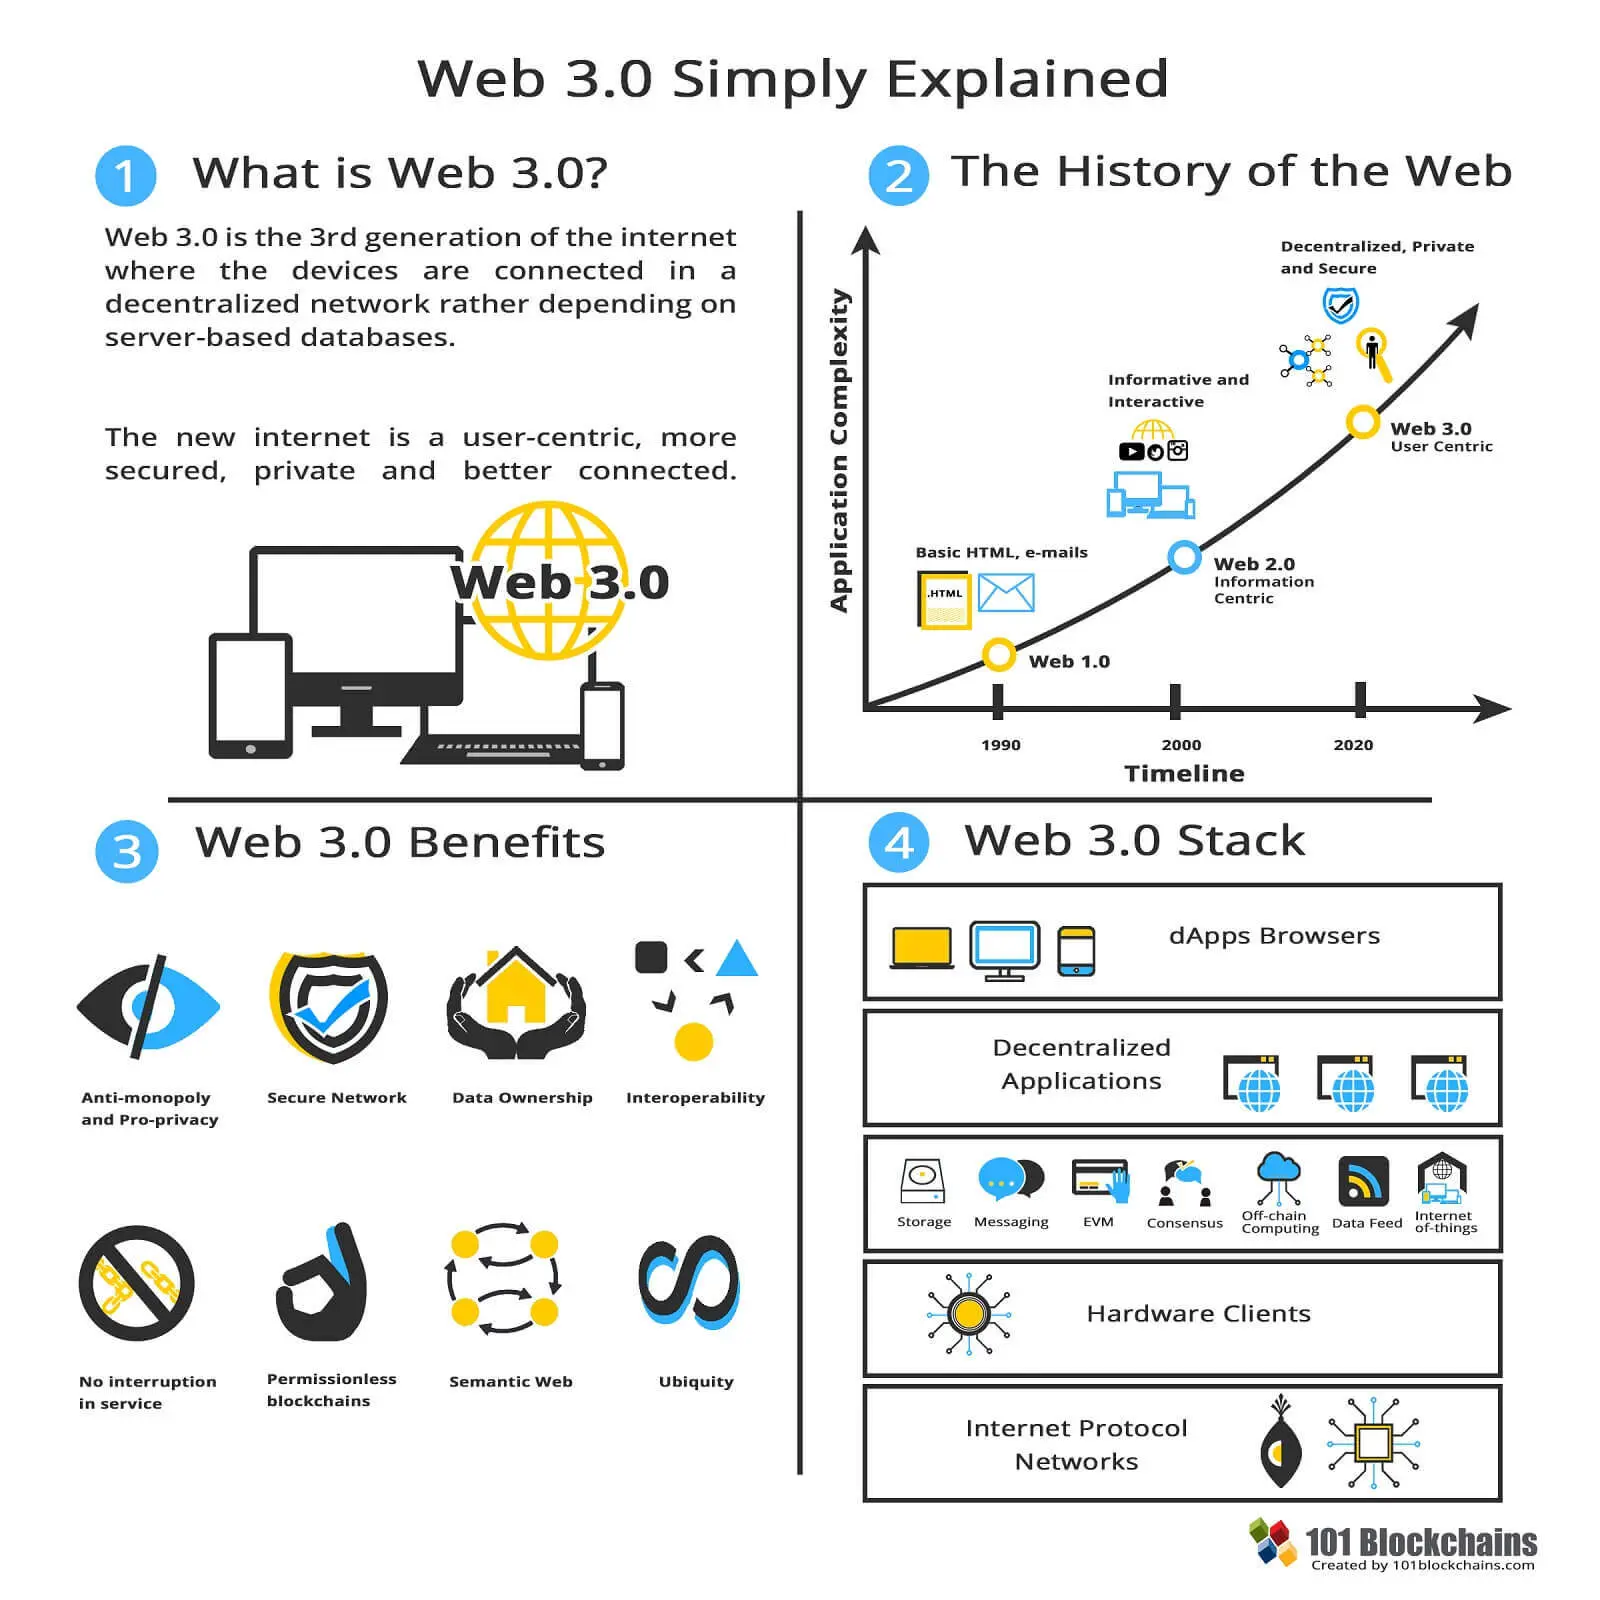 Web 3.0 Simply Explained